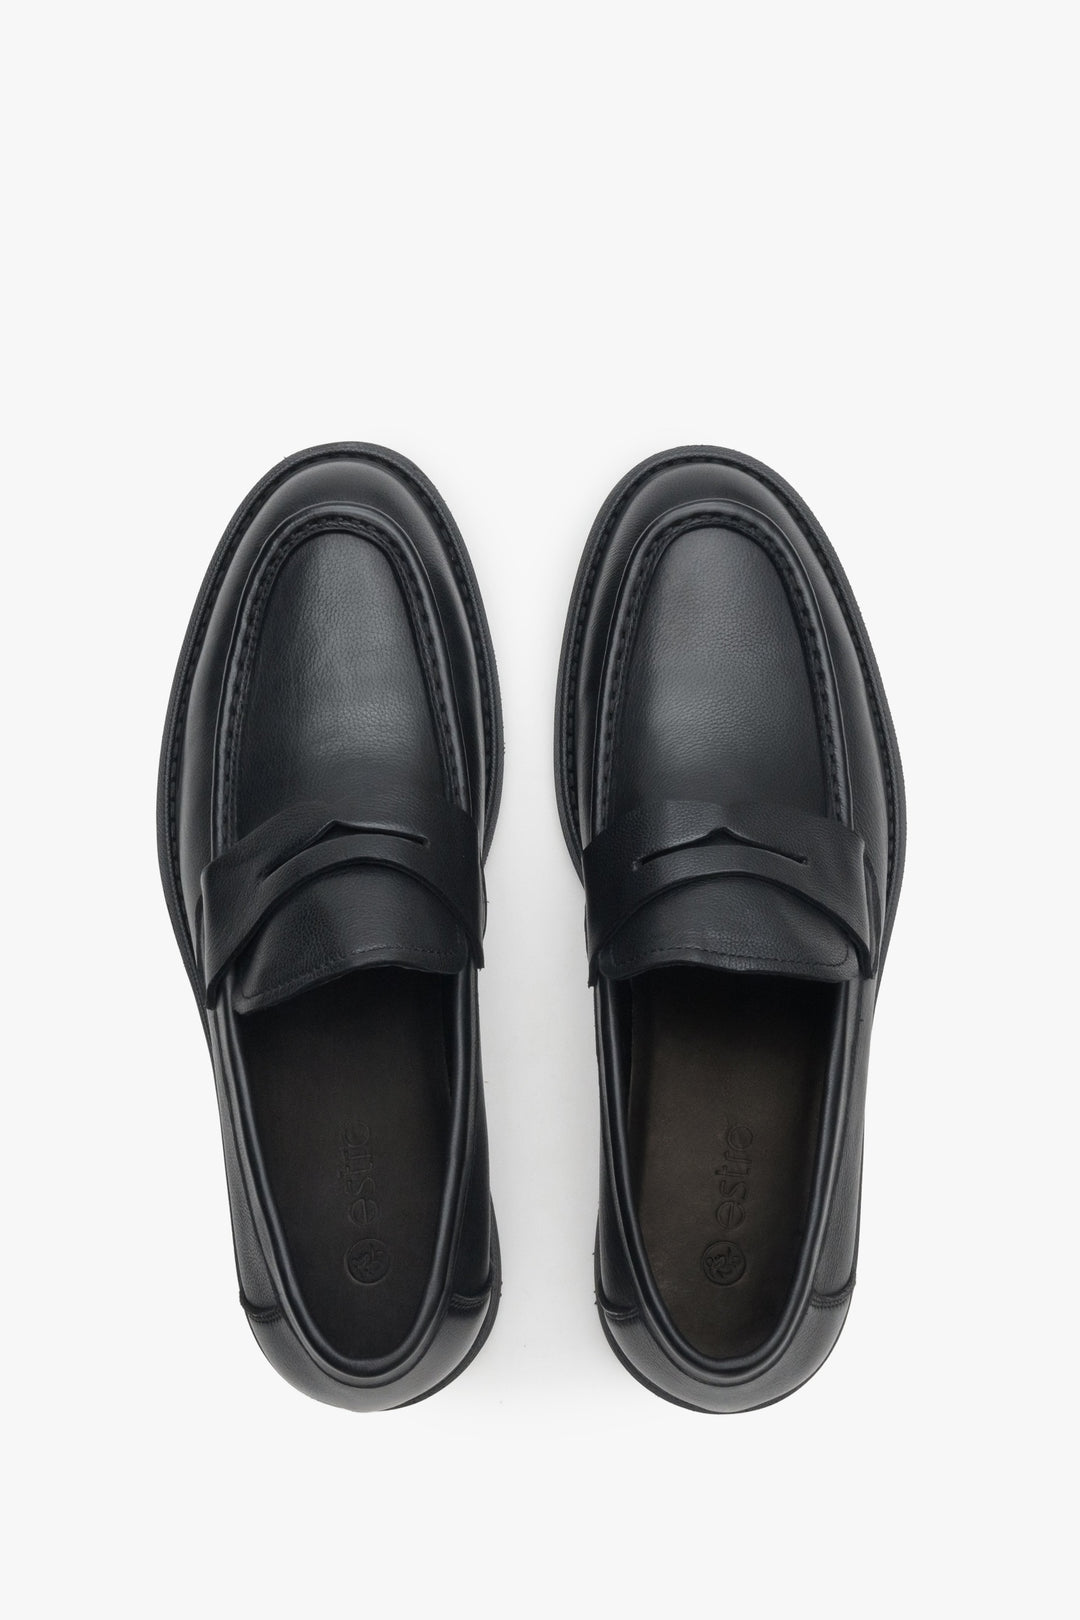 Men's black Estro loafers made of genuine leather - top view presentation of the model.